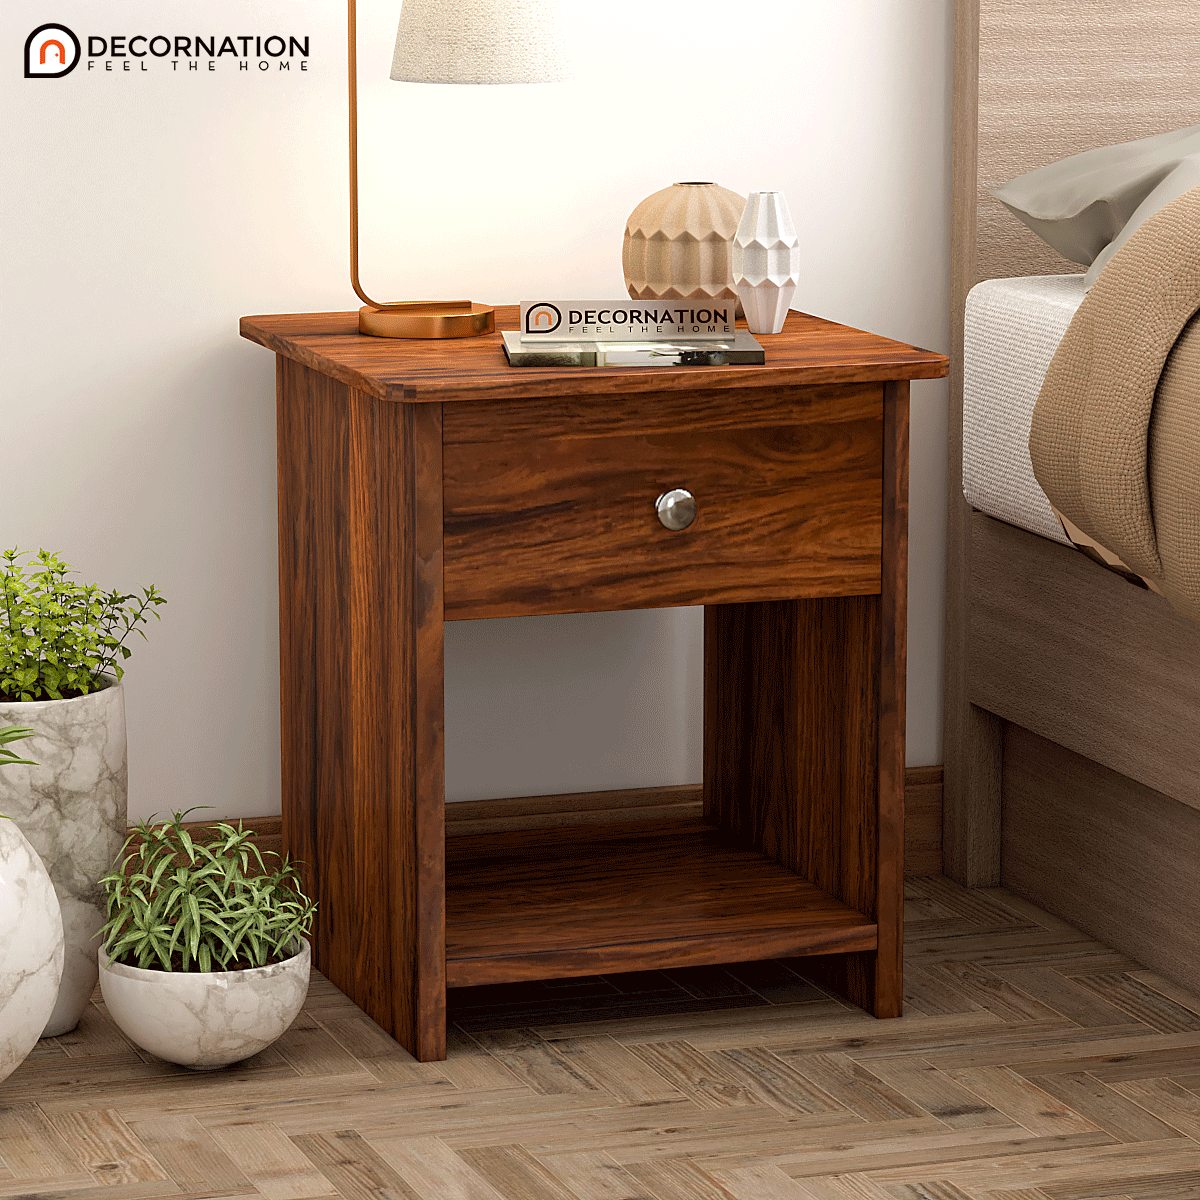 Tagus Bedside Table With 1 Drawer- Natural Finish